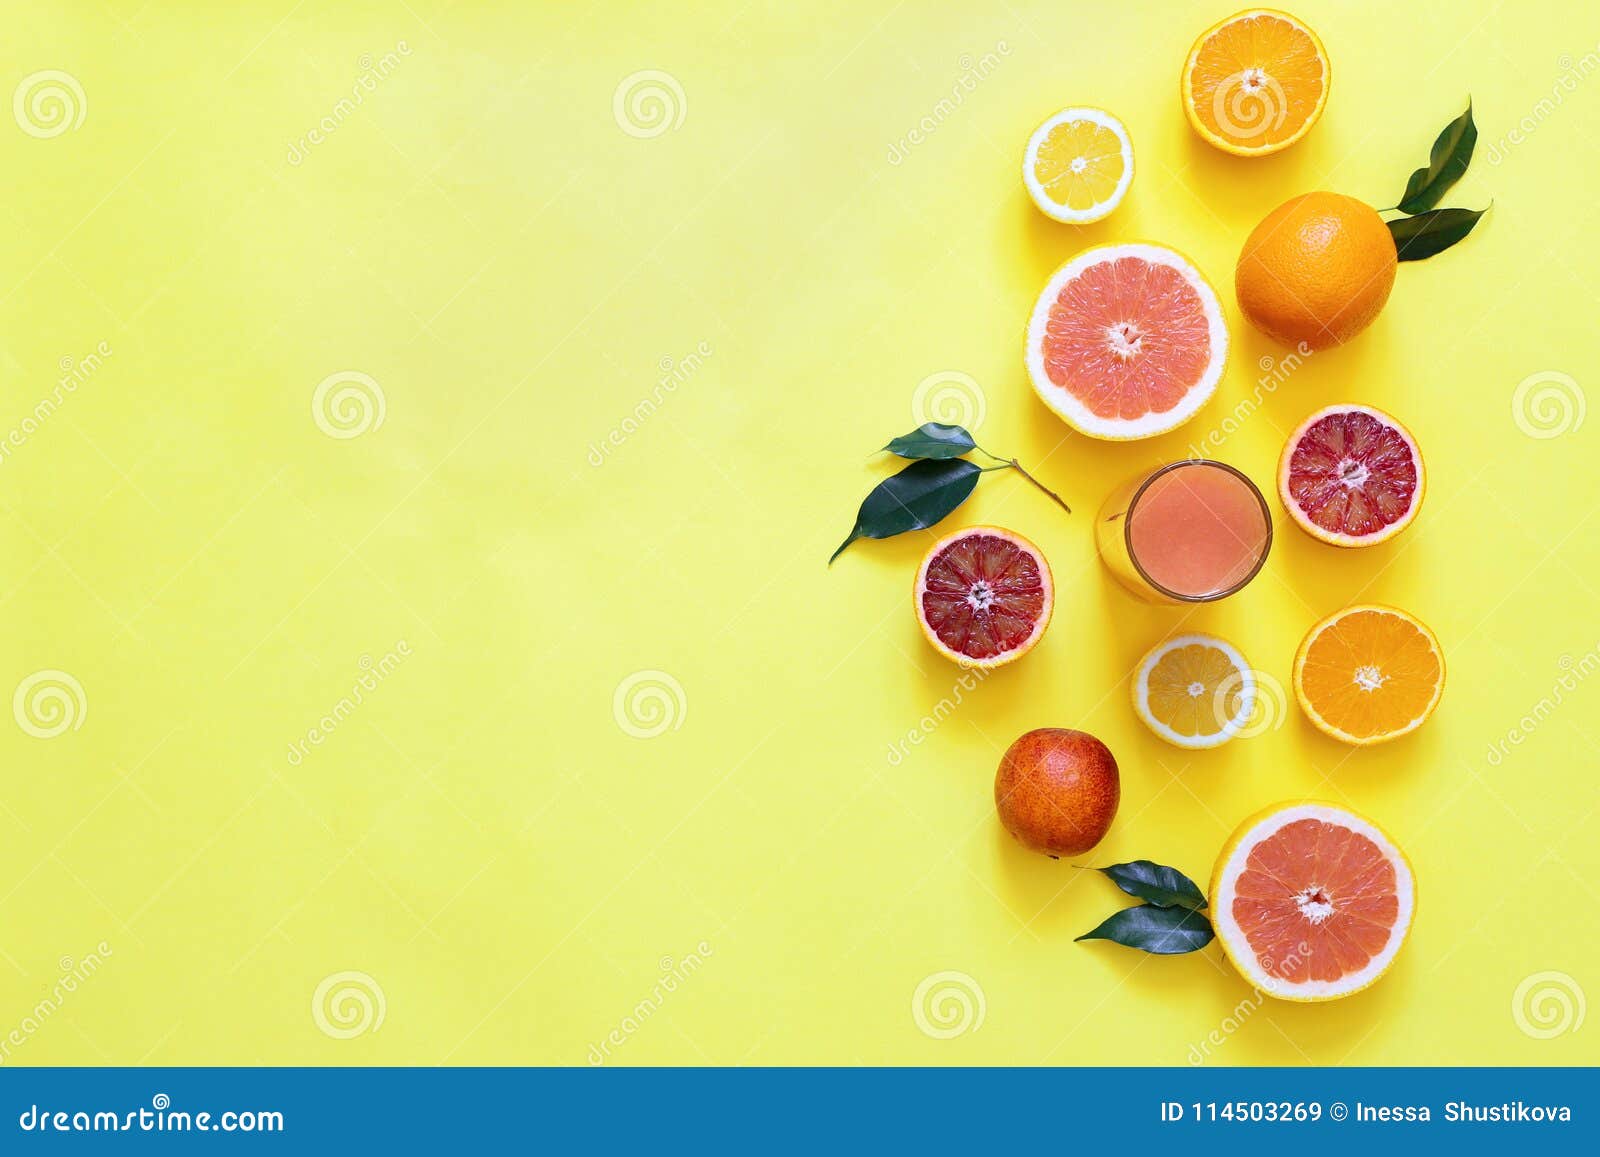 Fresh Juices and Fruit Cut into Slices on a Yellow Background Stock Image -  Image of fresh, copy: 114503269